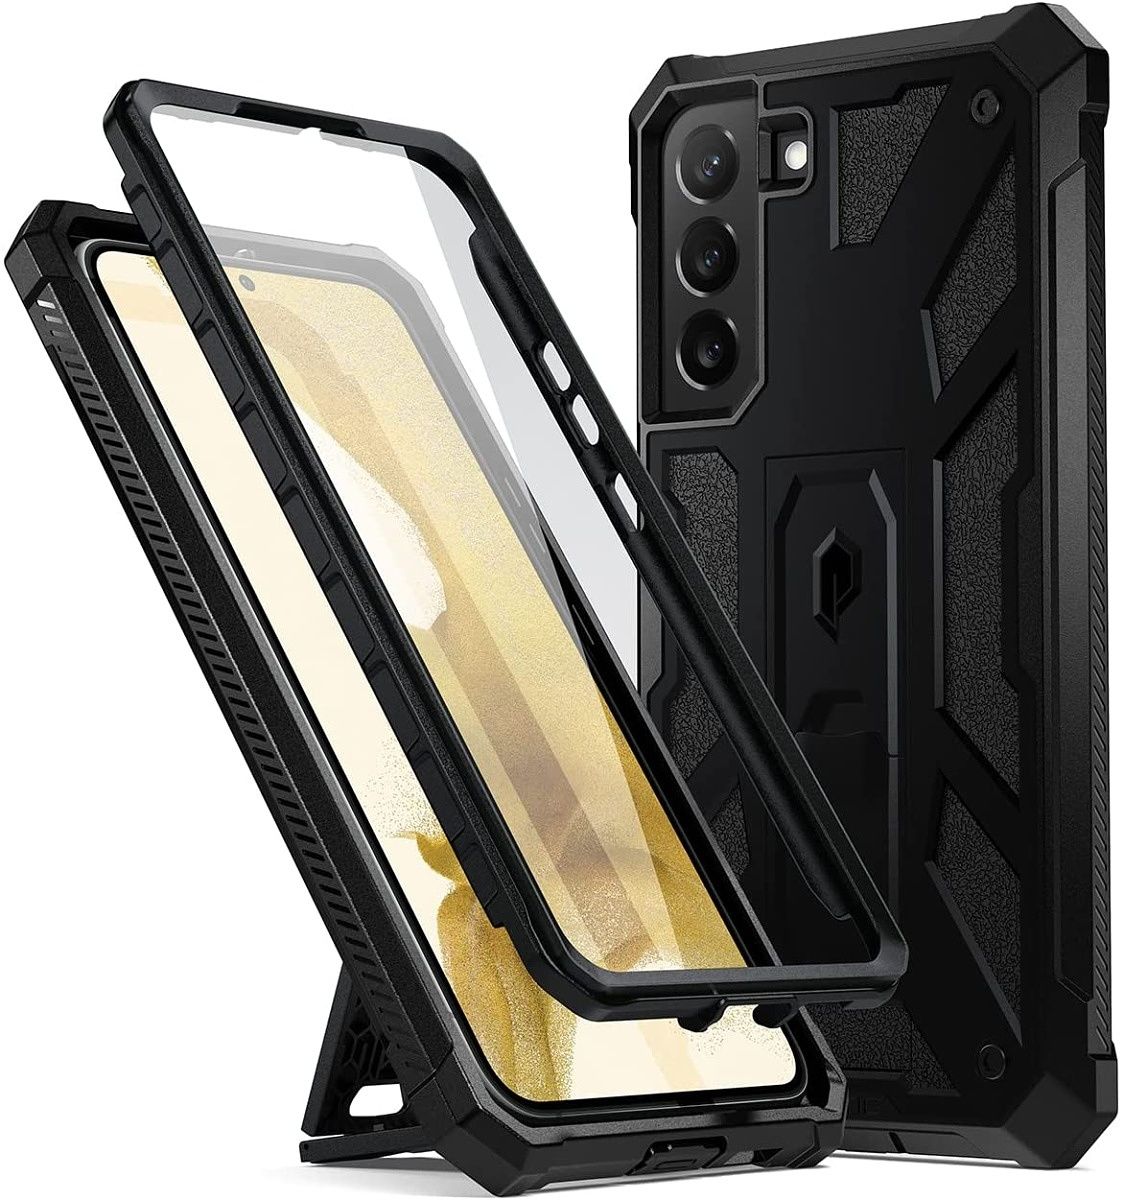 This full-body rugged case from Poetic has extra raised corners along the front to protect the display. Also has a kickstand and a built-in screen protector